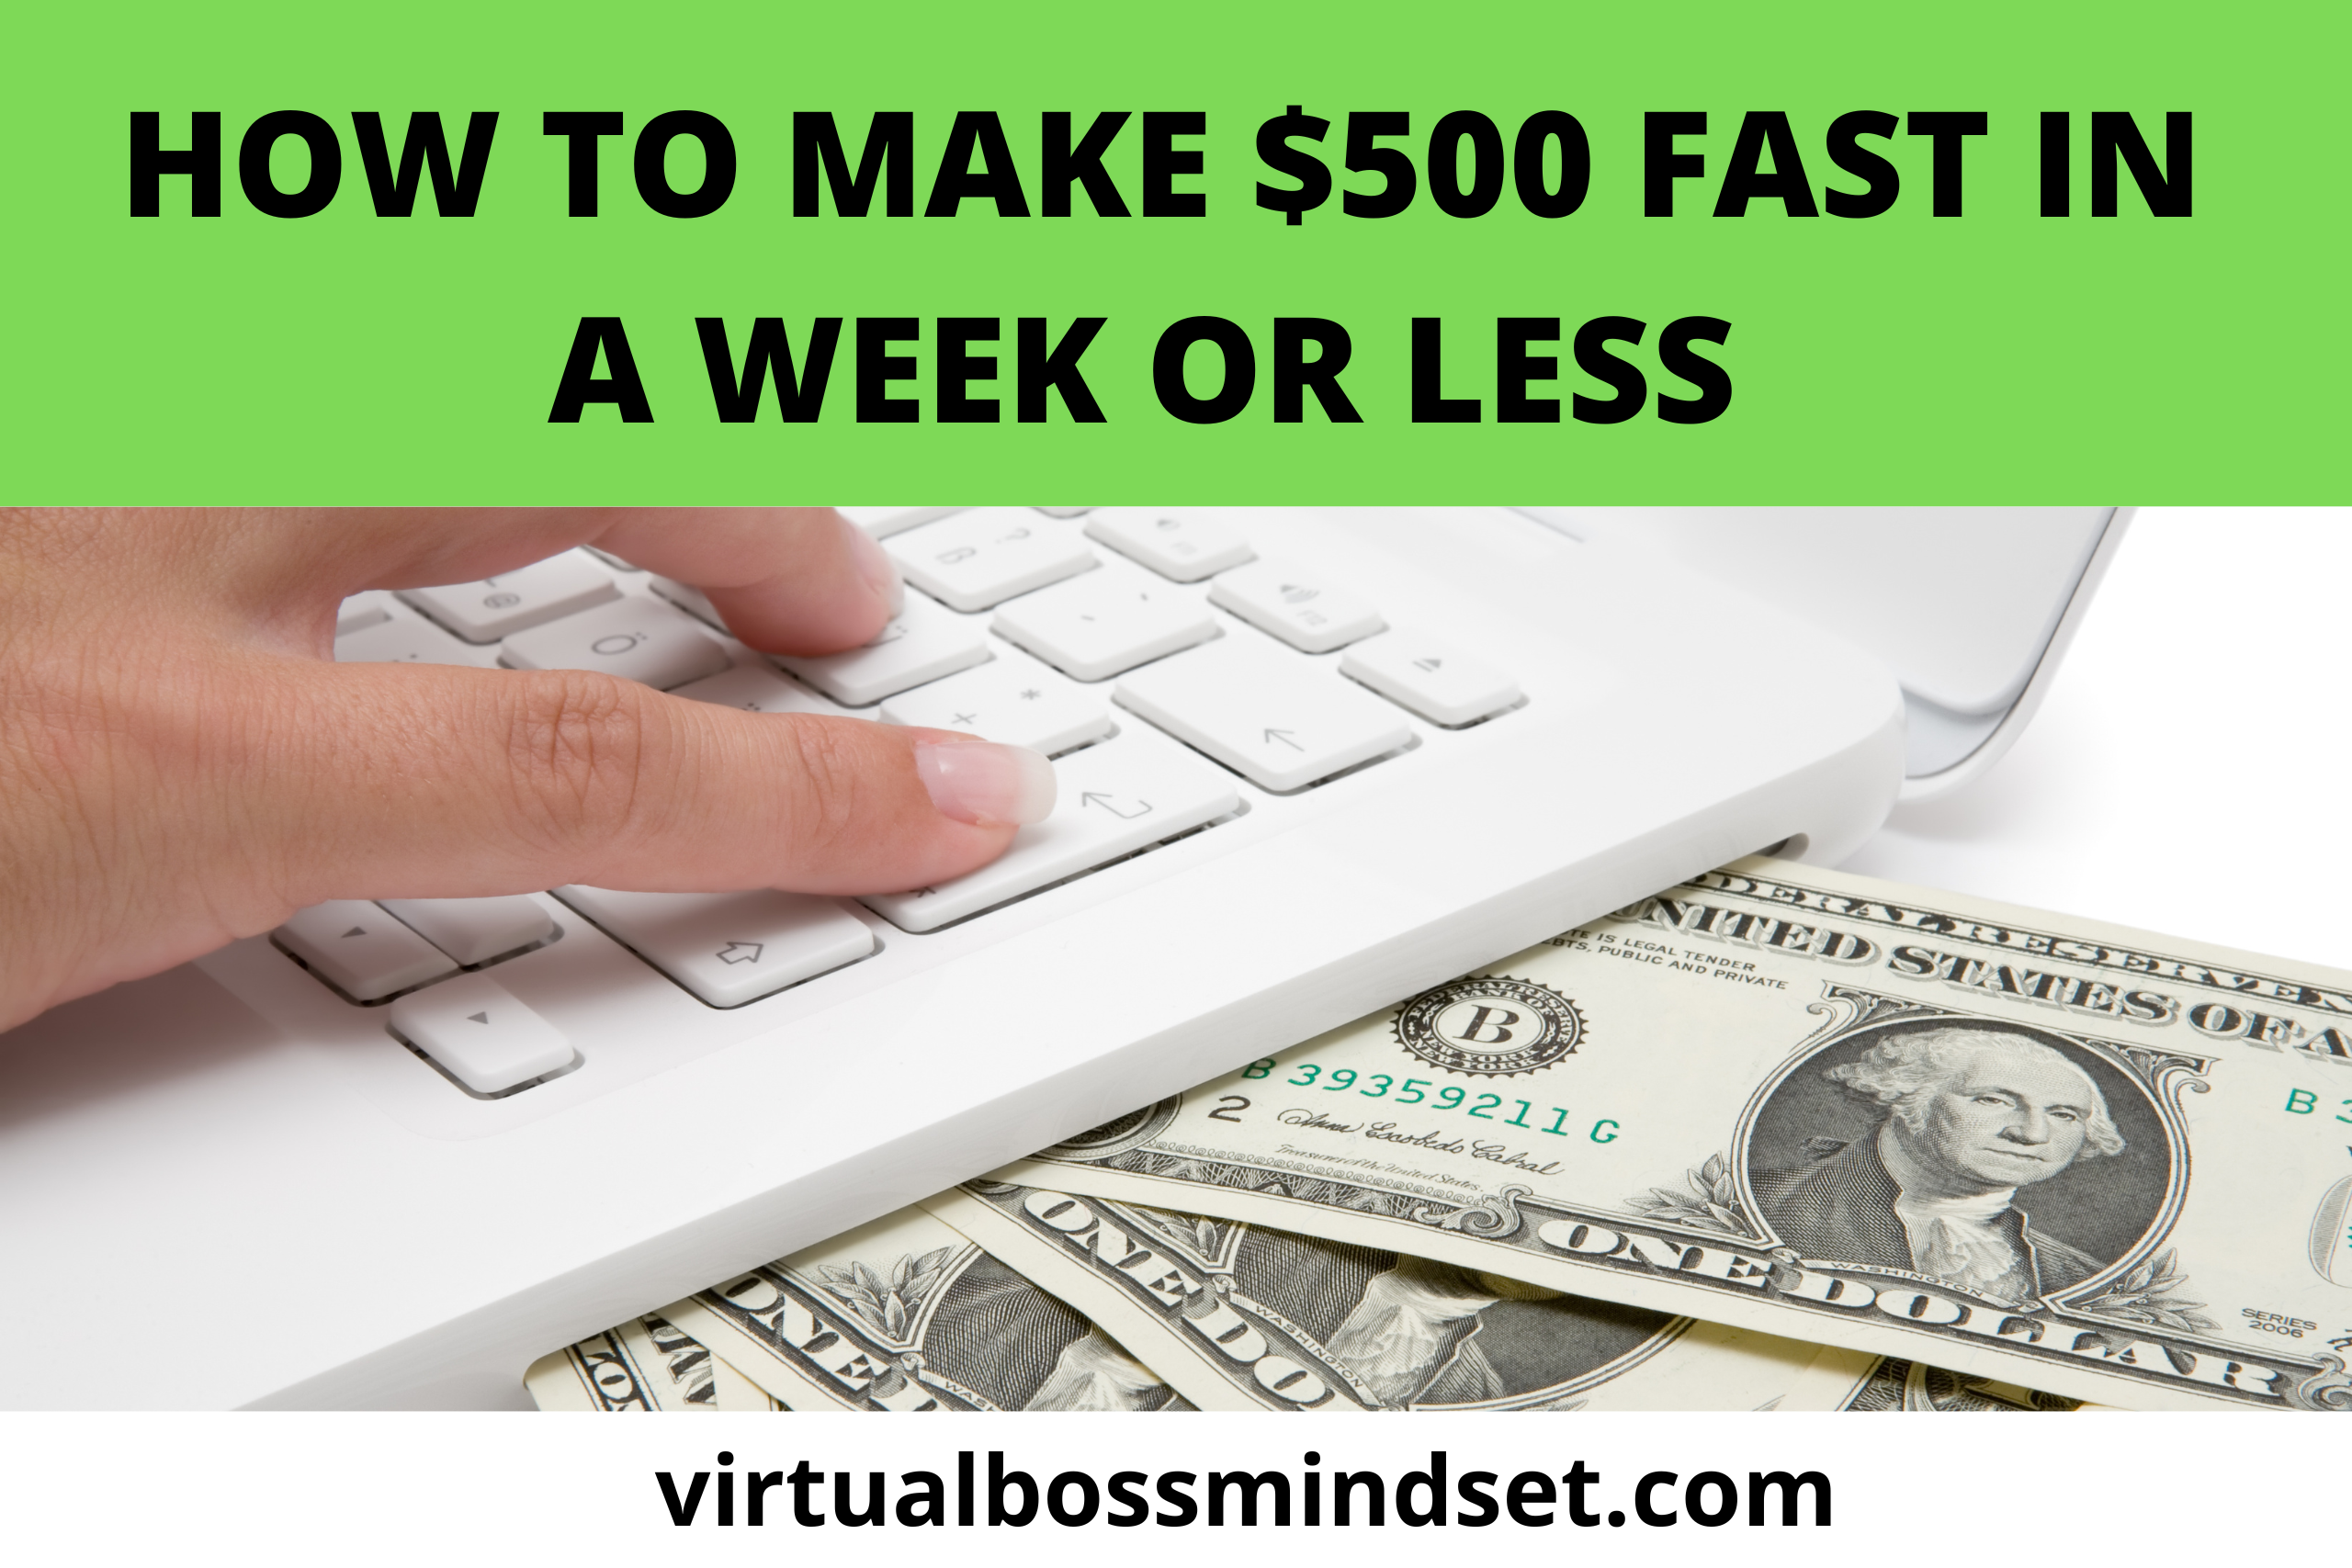 How to Make $500 Fast in a Week or Less ( 20 Ways to Consider)